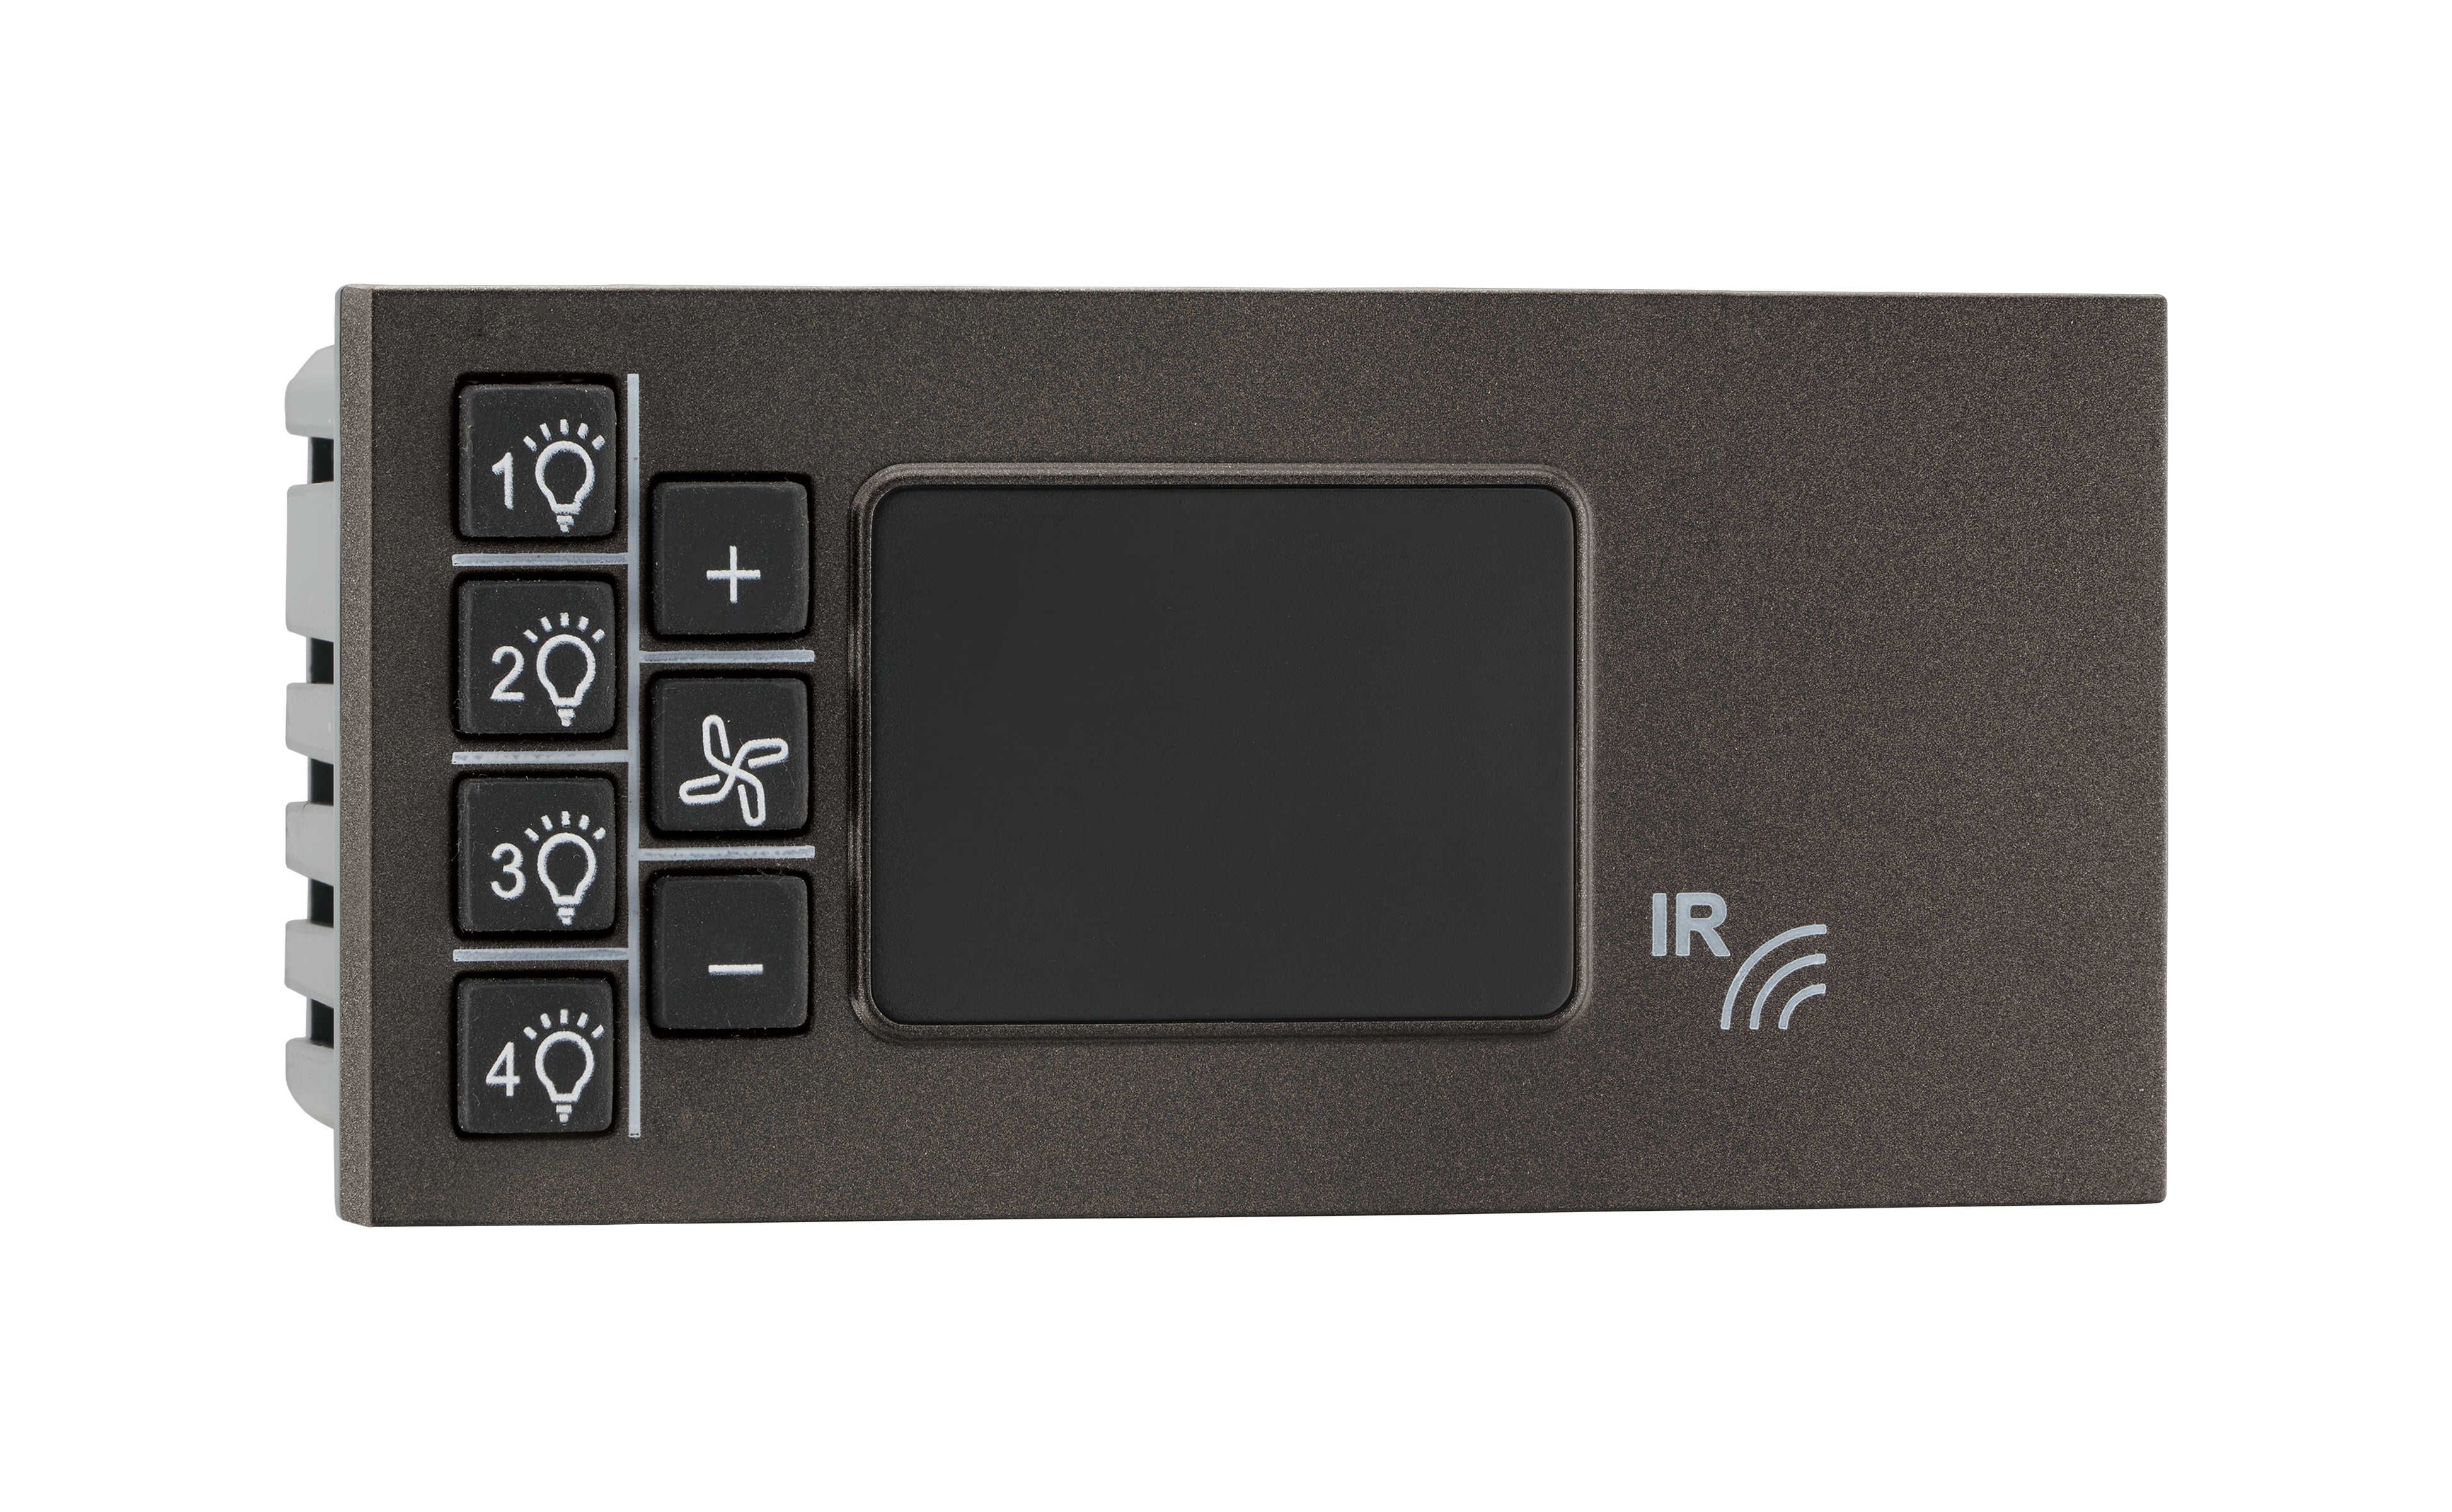 Myrius Remote Control Unit For Light And Fan 4 Mod Charcoal Grey